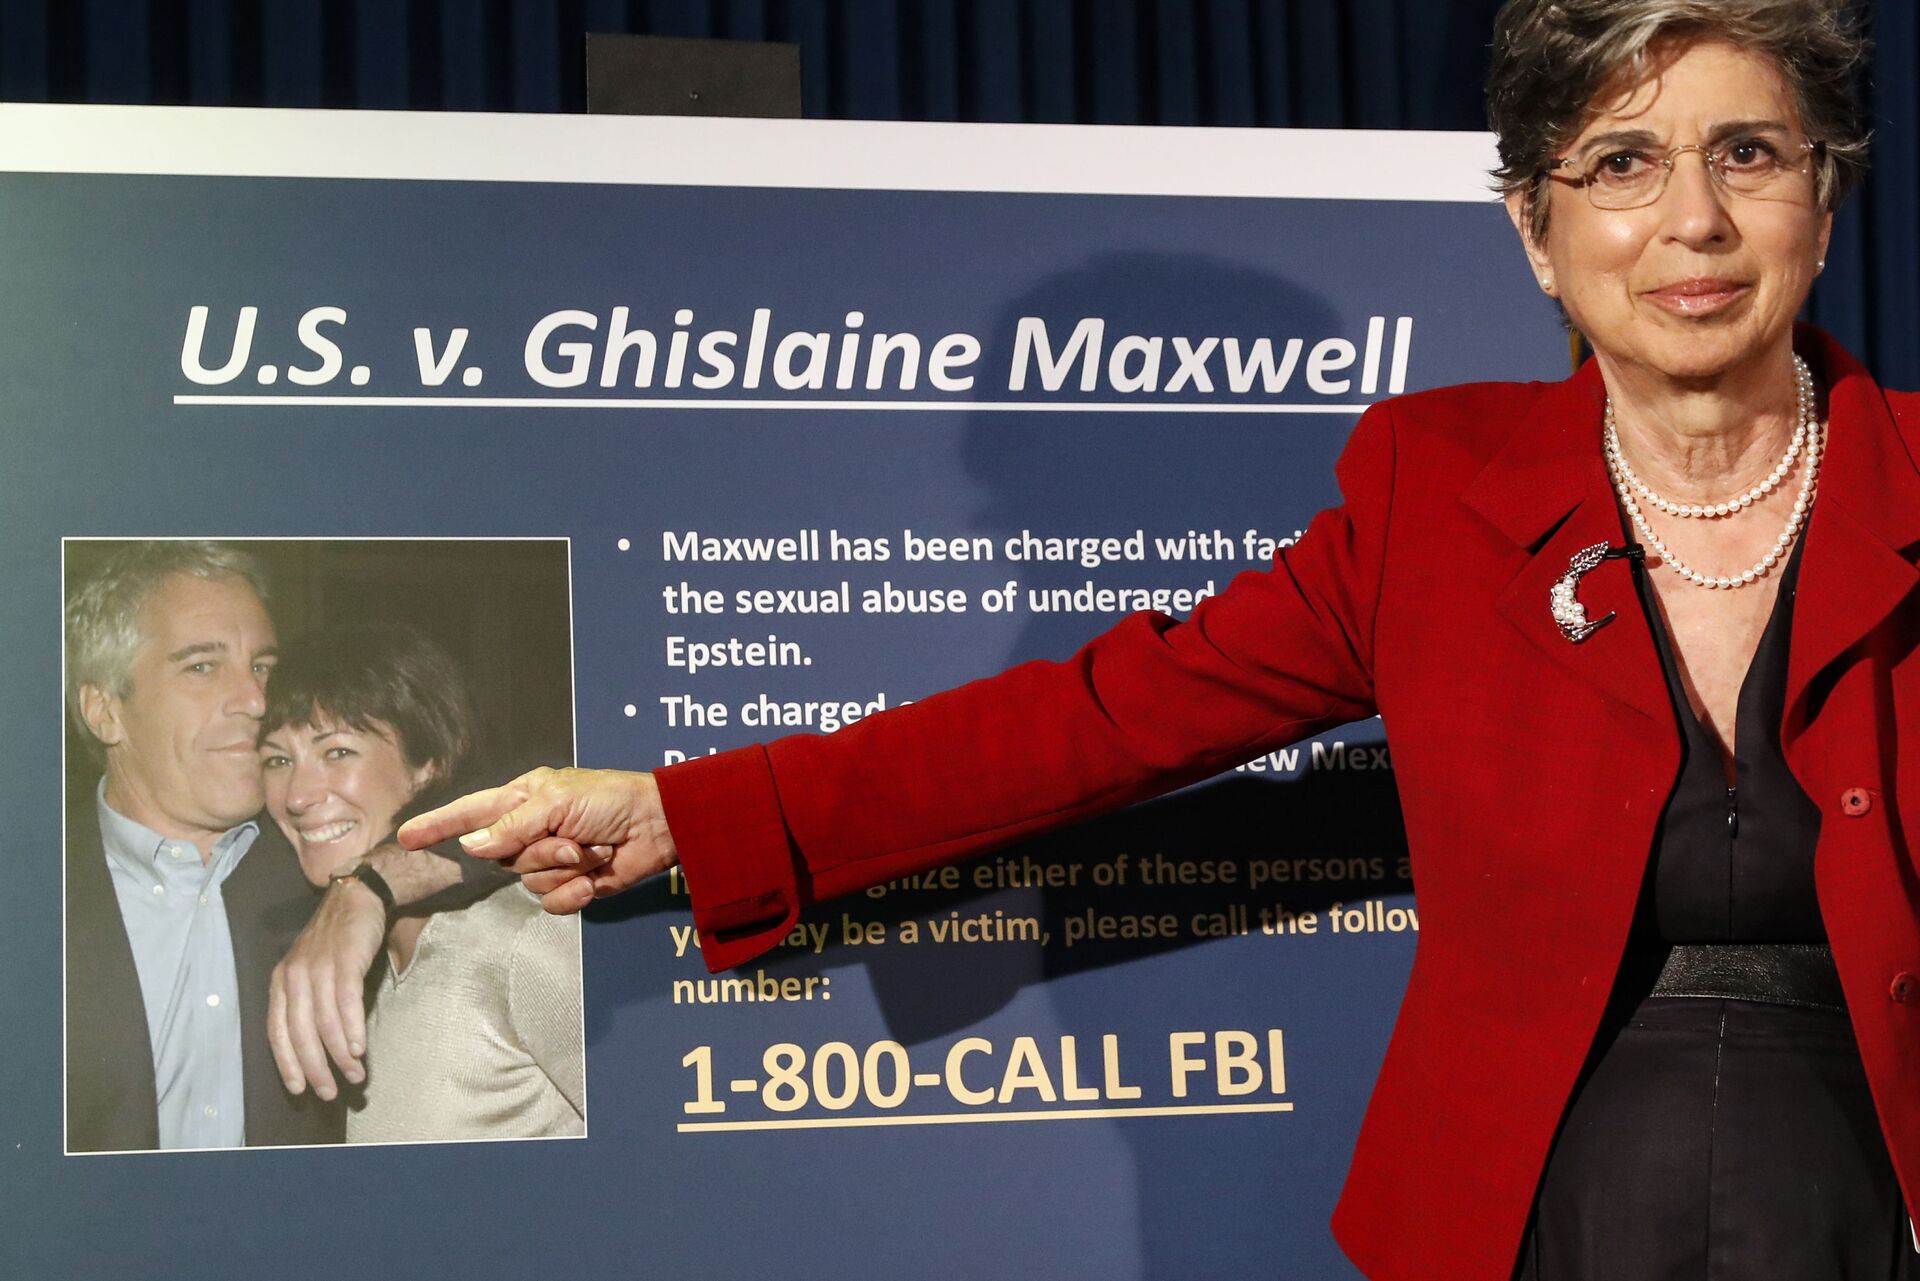 In this Thursday, July 2, 2020, file photo, Audrey Strauss, Acting United States Attorney for the Southern District of New York, gestures as she speaks during a news conference to announce charges against Ghislaine Maxwell for her alleged role in the sexual exploitation and abuse of multiple minor girls by Jeffrey Epstein, in New York - Sputnik International, 1920, 21.09.2021